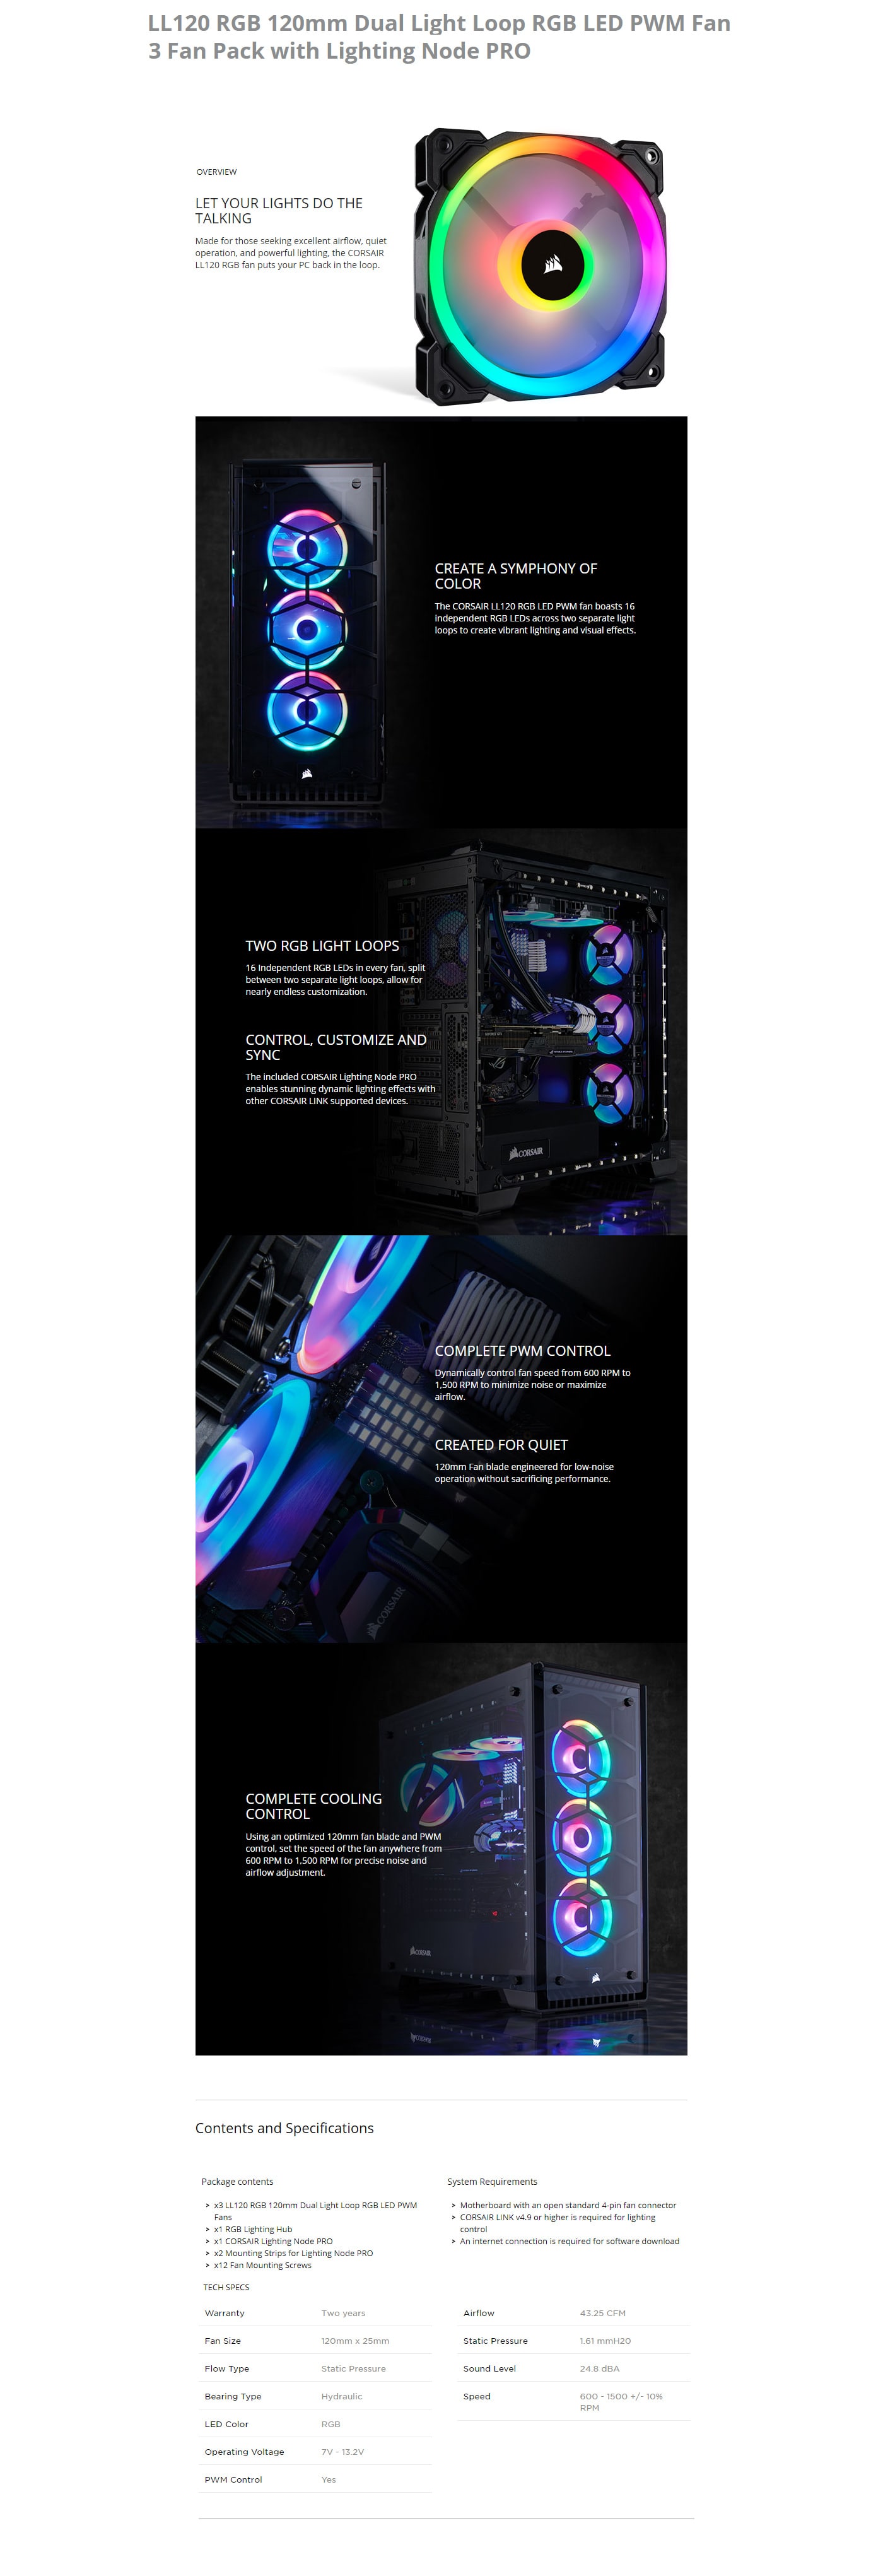 Corsair LL120 RGB 120mm Dual Light Loop RGB LED PWM Fan  3 Fan Pack with Lighting Node PRO features